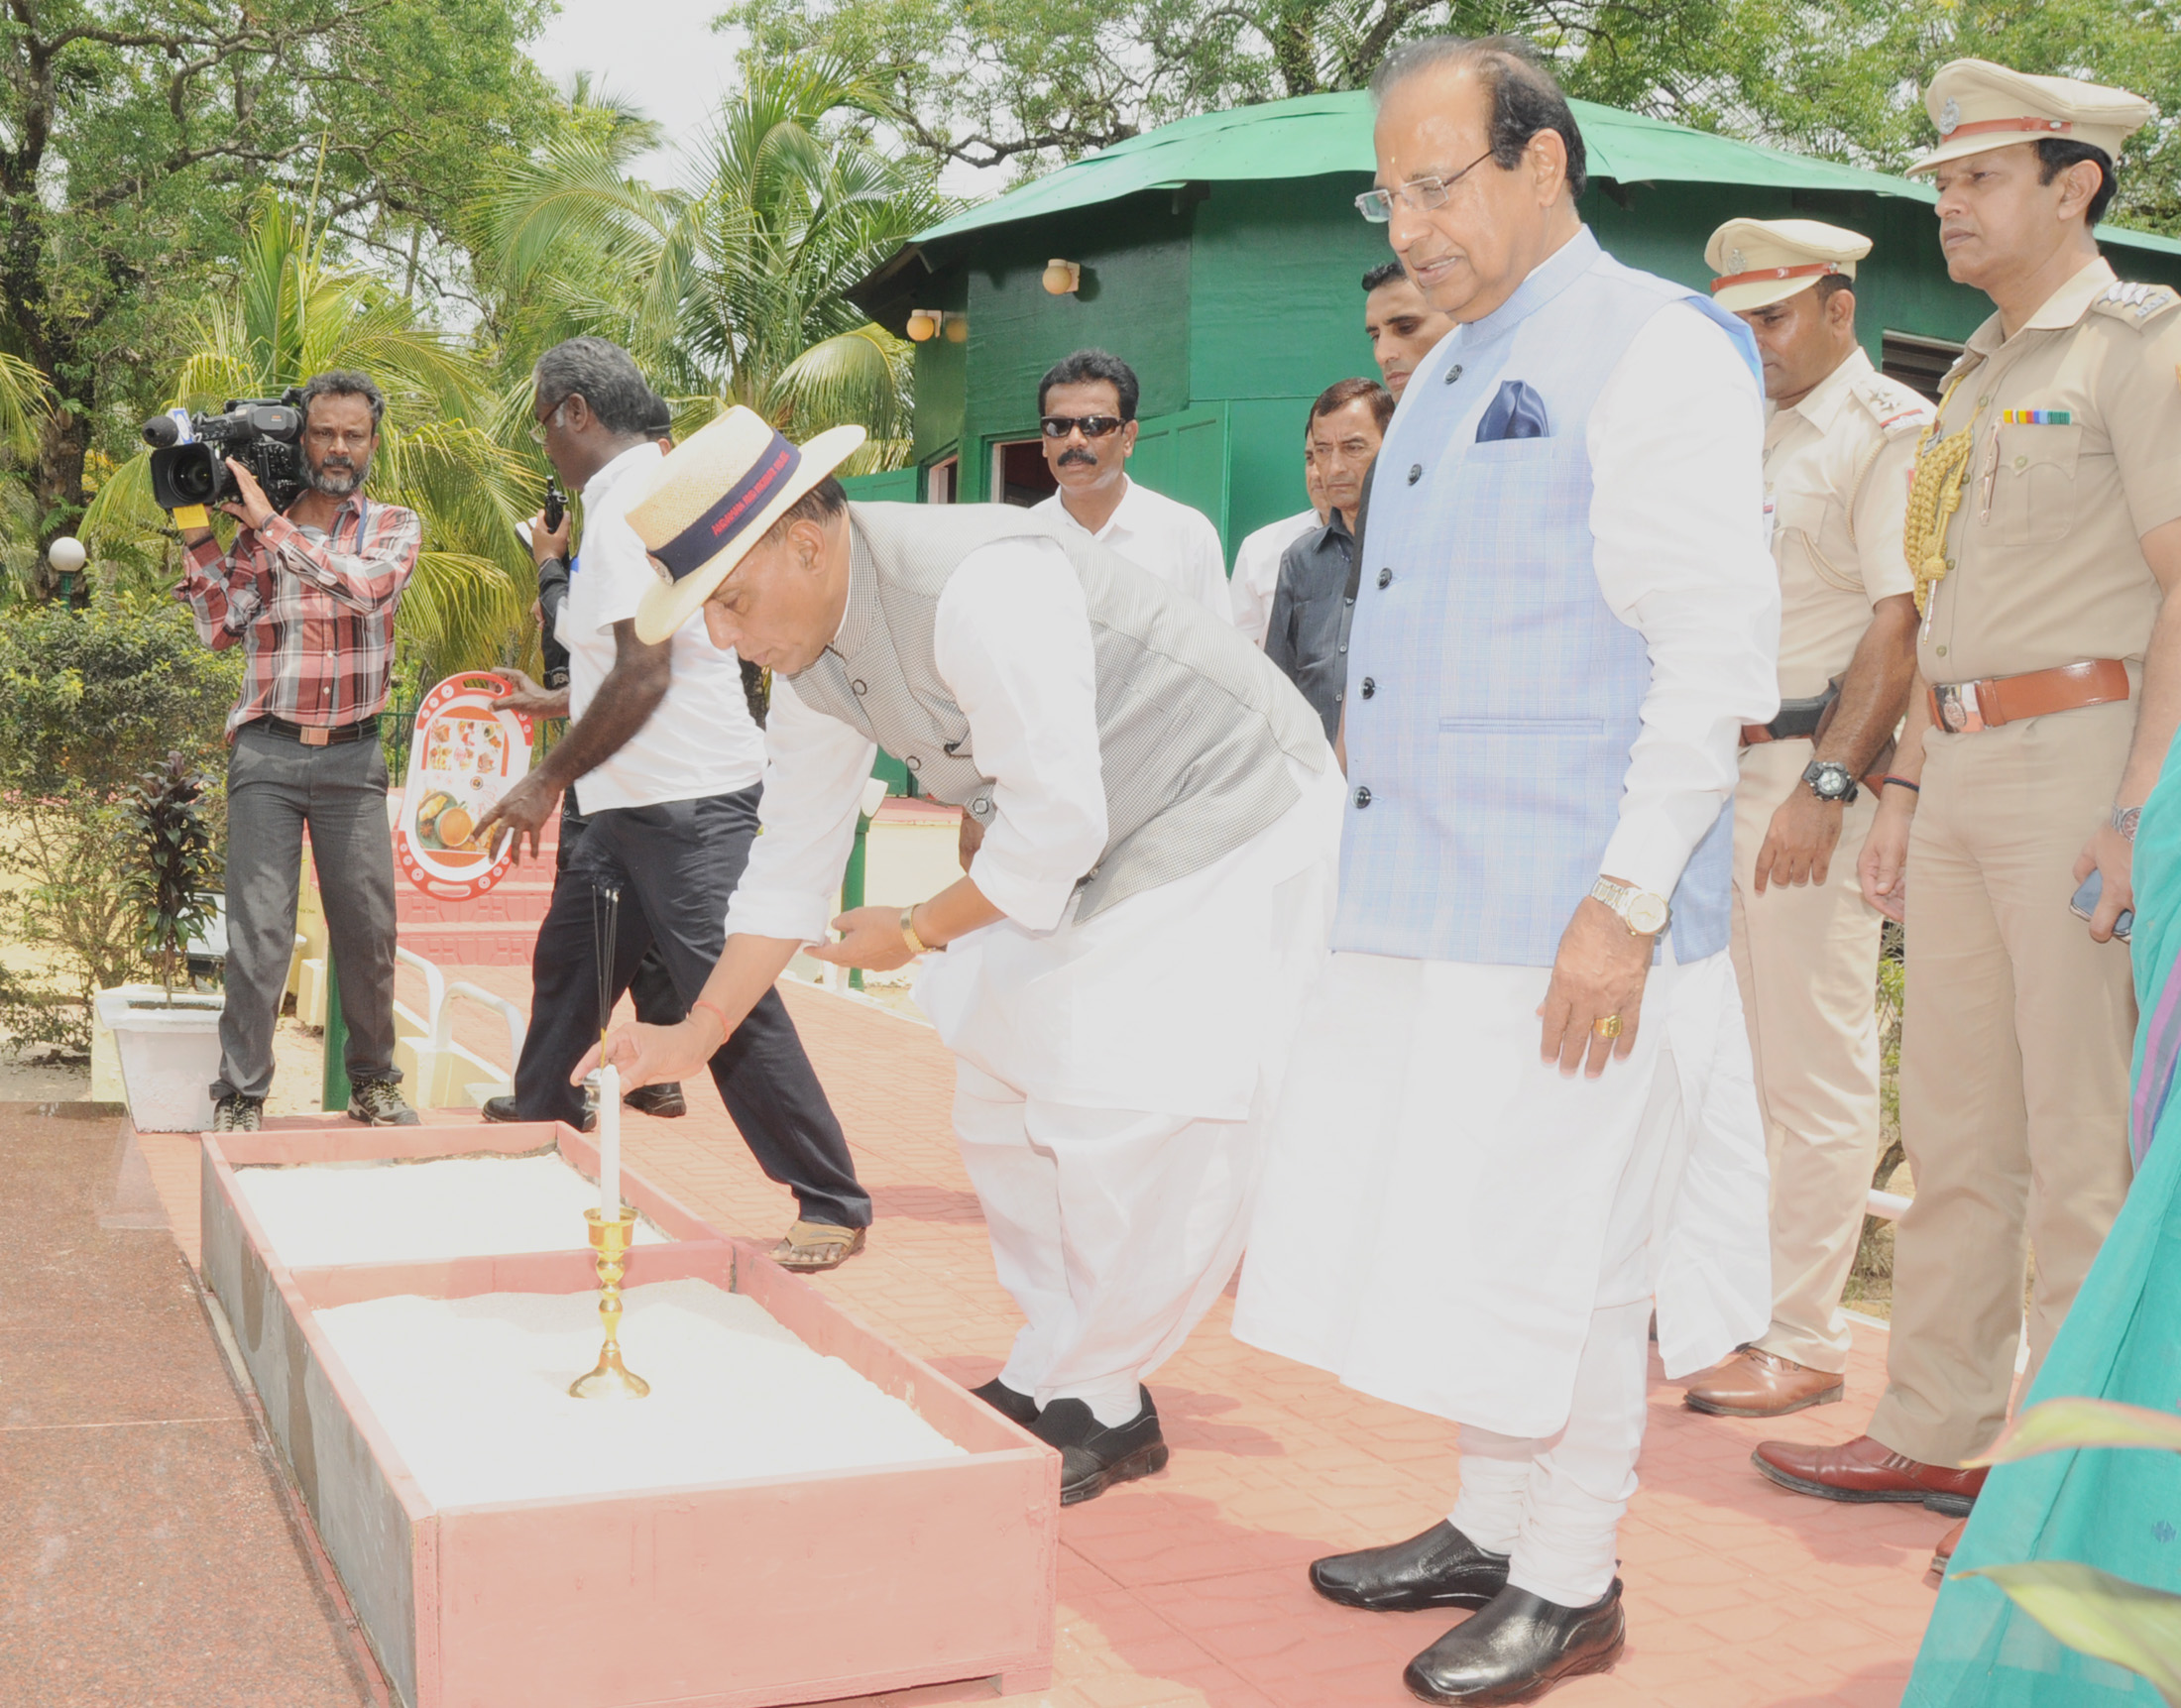 The Union Home Minister, Shri Rajnath Singh visiting the gallery at the Tsunami Memorial, in Car Nicobar on April 07, 2017.  	The Lieutenant Governor of Andaman and Nicobar Islands, Prof. Jagdish Mukhi is also seen.